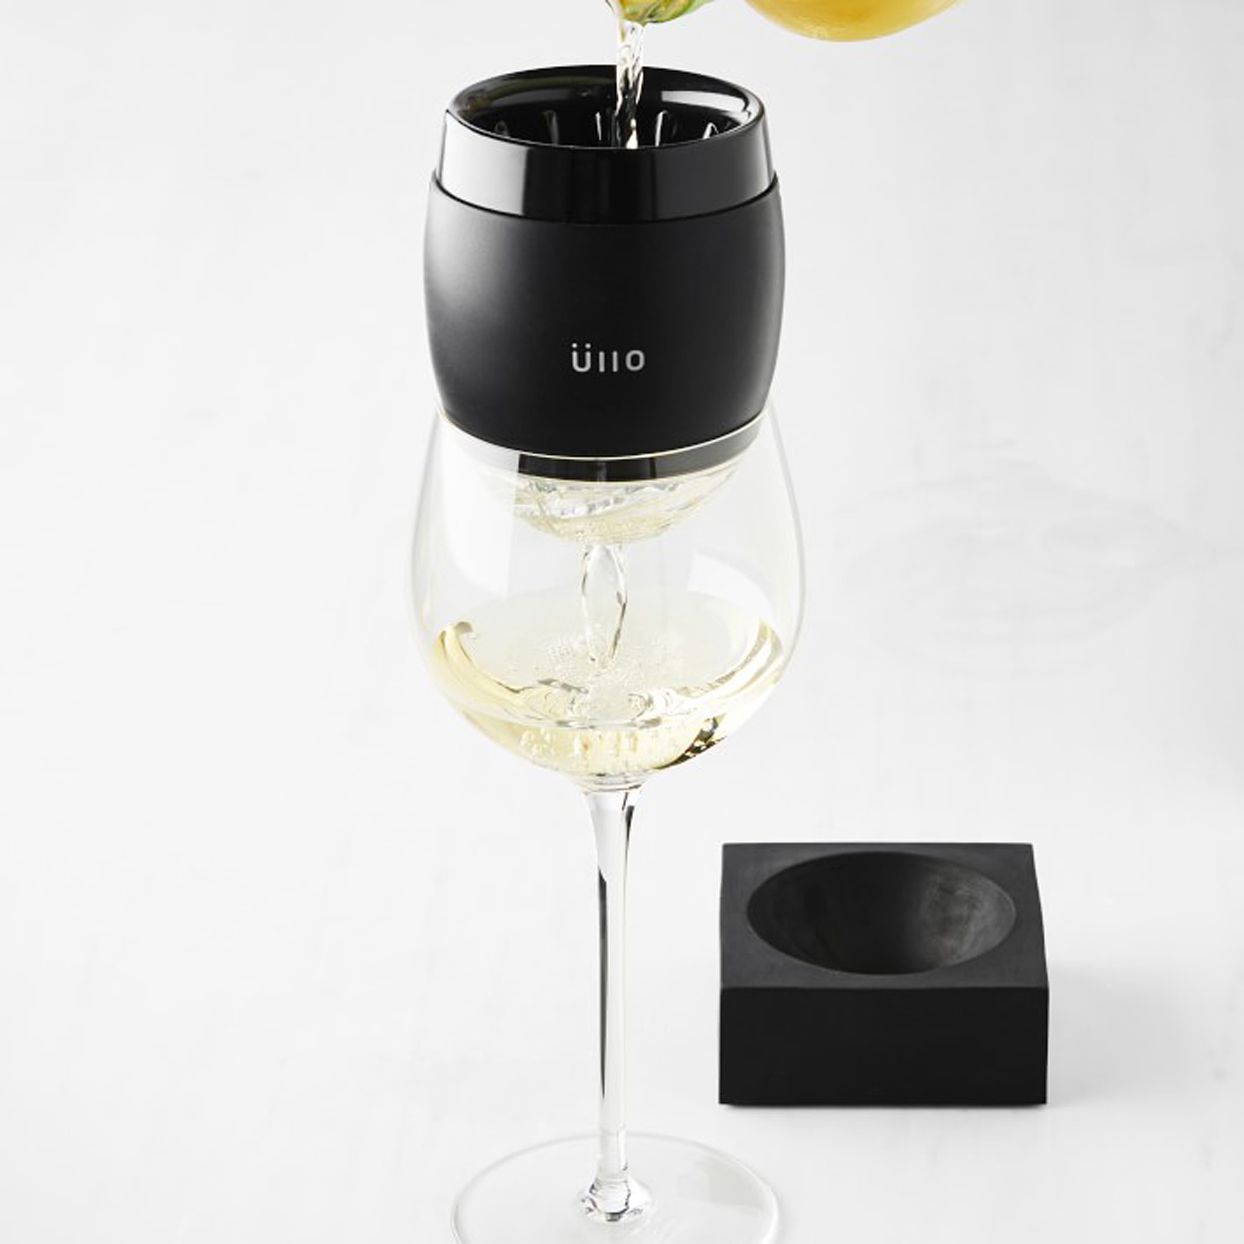 Chill wine purifier on a glass of white wine